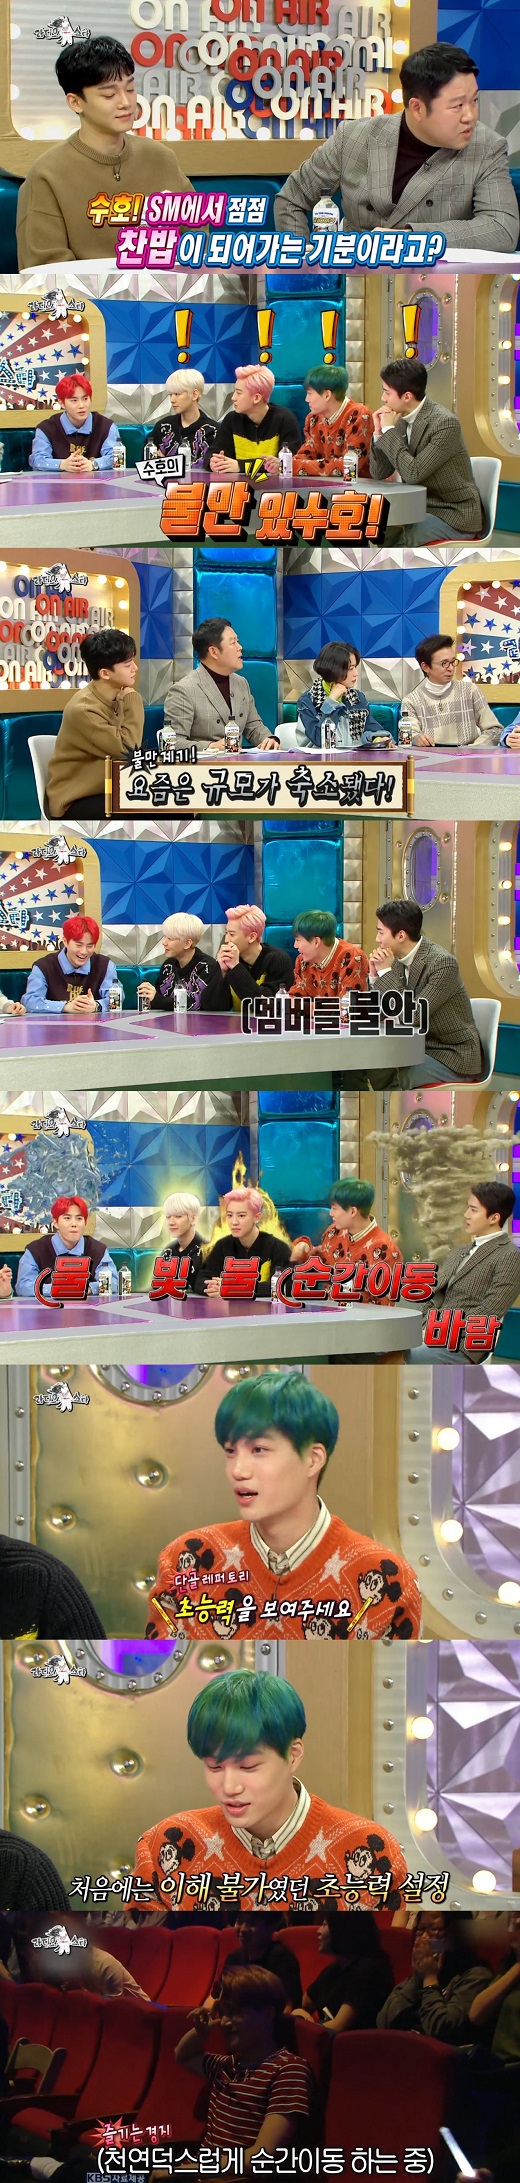 Boy group EXO members Suho and Kai showed their candid talks without hesitation.MBC entertainment program Radio Star broadcasted on the 4th night was featured in EXO Radio Star feature, and Chen, Suho, Baekhyun, Chanyeol, Kai and Sehun appeared.On this day, Suho said, I am saddened by my agency SM Entertainment.When it was good with growl, I felt like I had spent a lot of money on music videos overseas and promotions. It is simple these days.He told us it was minimalism.I went to a concert in Indonesia a while ago, and I gave a suite if I was a leader, but I gave a twin room from a certain point, he confessed.When MC Kim Kook-jin asked, Was it a suite before that? EXO members said, The leader gave me a suite.In addition, Chanyeol said, When I go to a hotel, I rent a floor for the safety of my fans and members. These days, (Suho) is sitting in a narrow room.Kai also expressed regret as an SM sniper, saying that it took a long time for producer Lee Soo-man to understand the concept of superpowers presented to EXO.When I debuted, I had one superpower, one thing, all the things that are so extraordinary.I had to show it even if I had nothing to show you every time I asked for my psychic ability, he added. After five years, I understand the meaning.